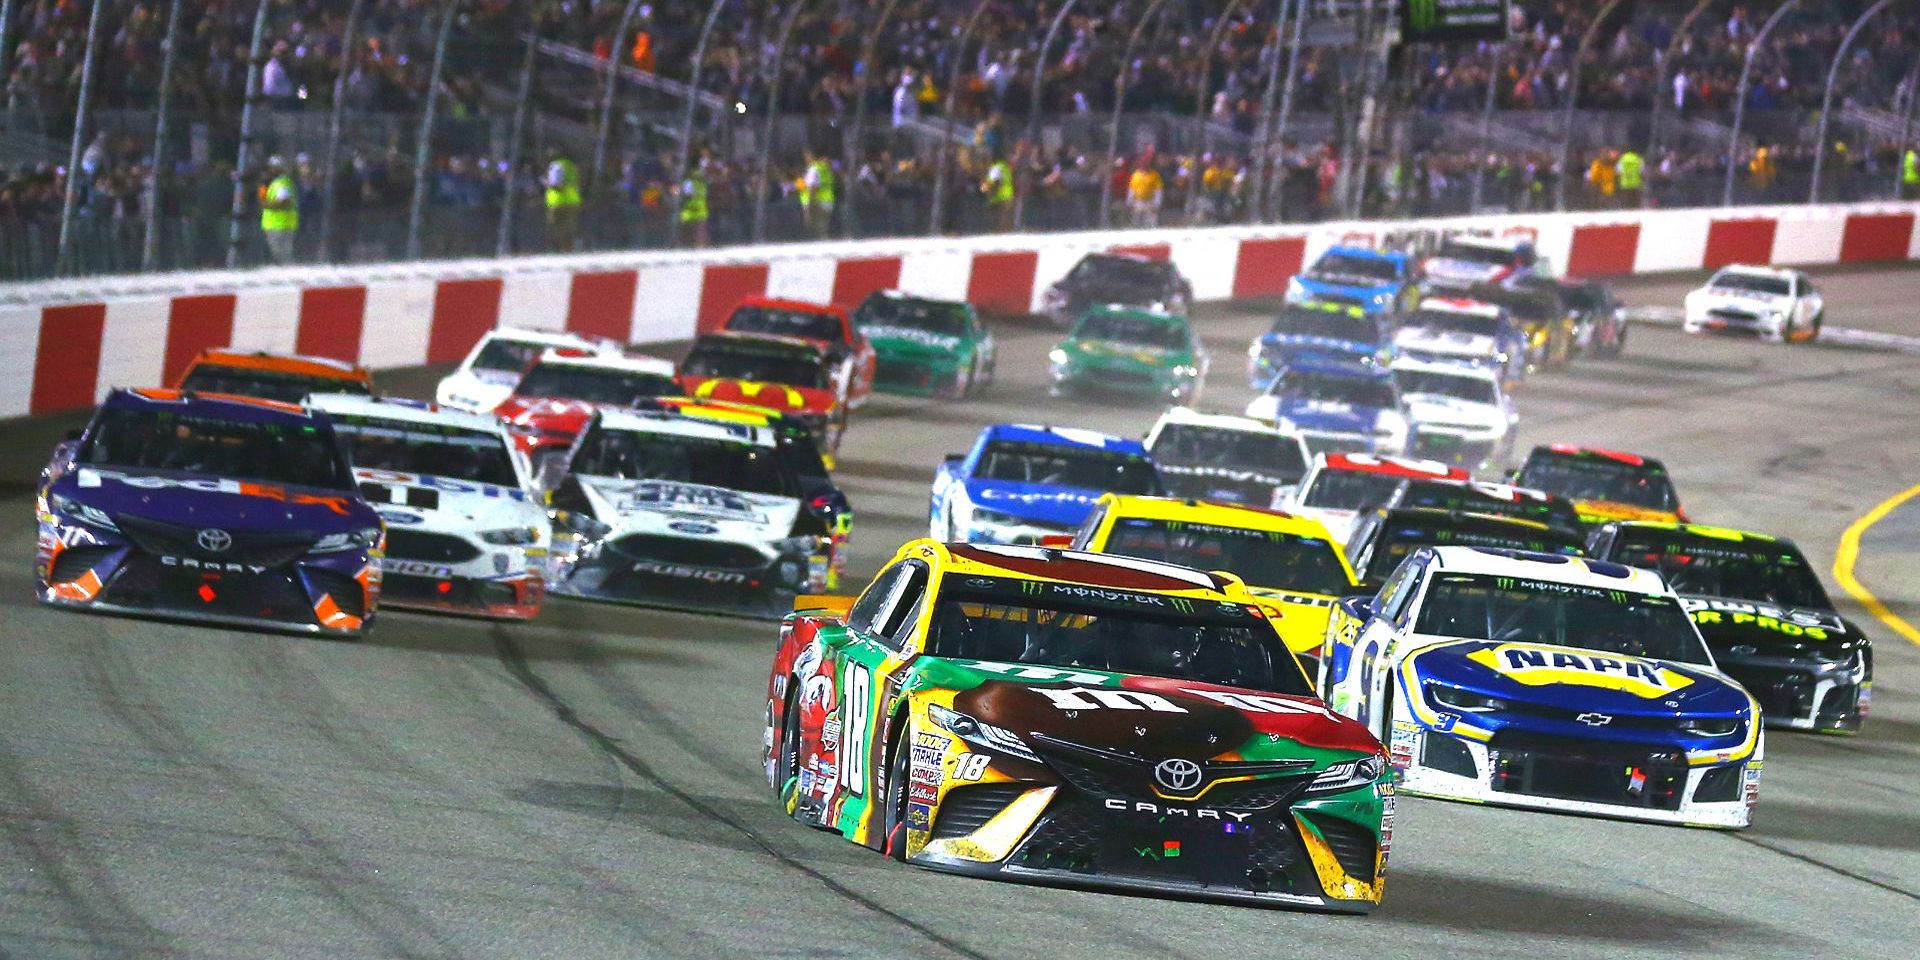 Nascar 10 Best Tracks To Watch The Race, Ranked